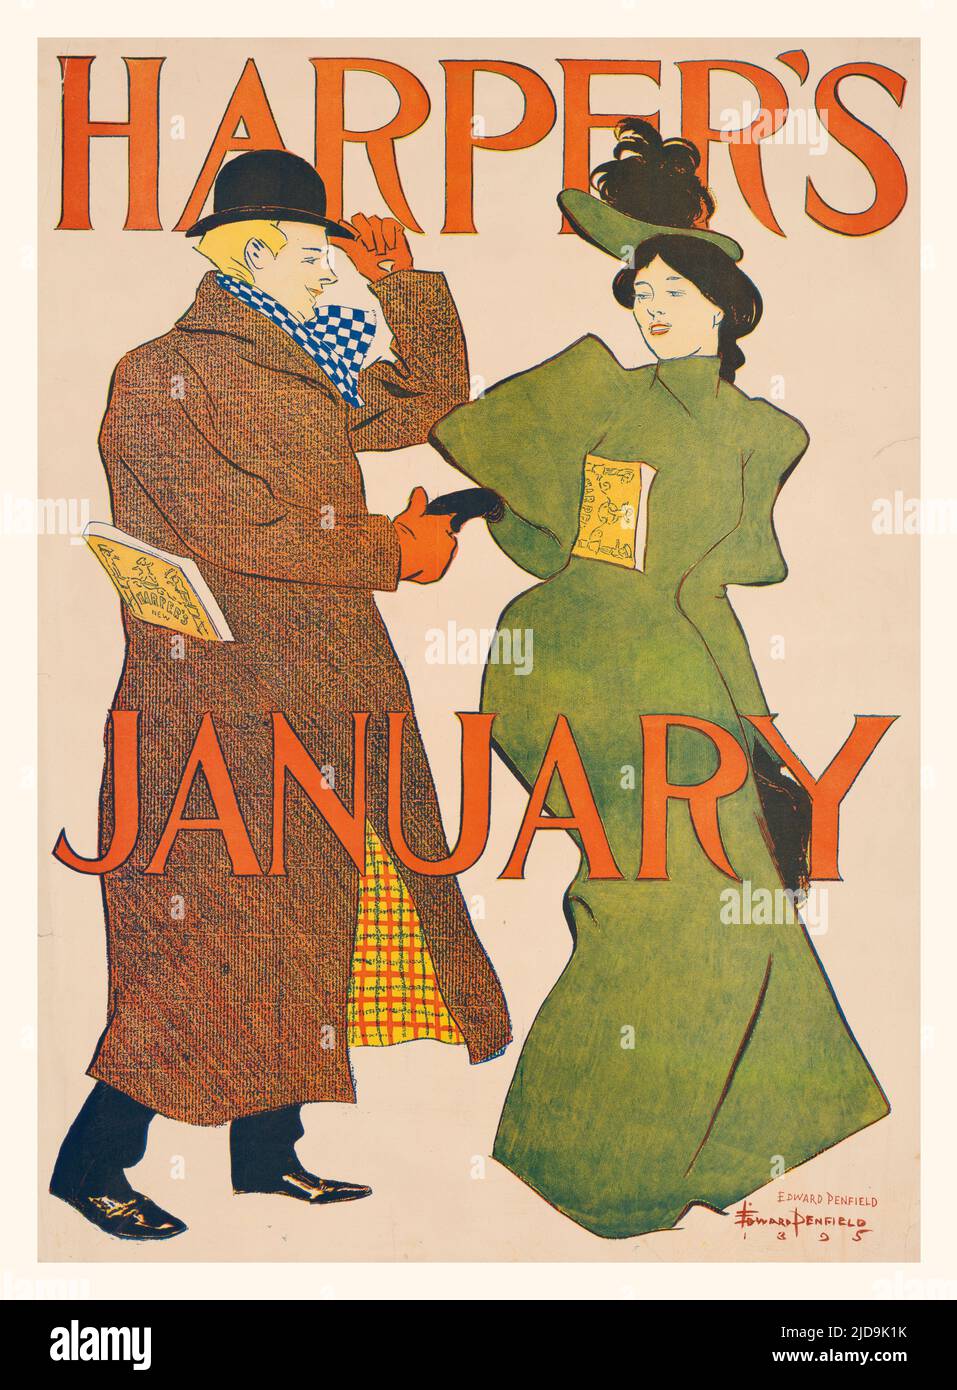 A turn of the 20th century illustration by Edward Penfield (1866-1925) considered by many to be the father of the American poster. Featuring a couple, the man introducing himself to the young woman. Harper’s Magazine, the oldest general-interest monthly in America. Stock Photo